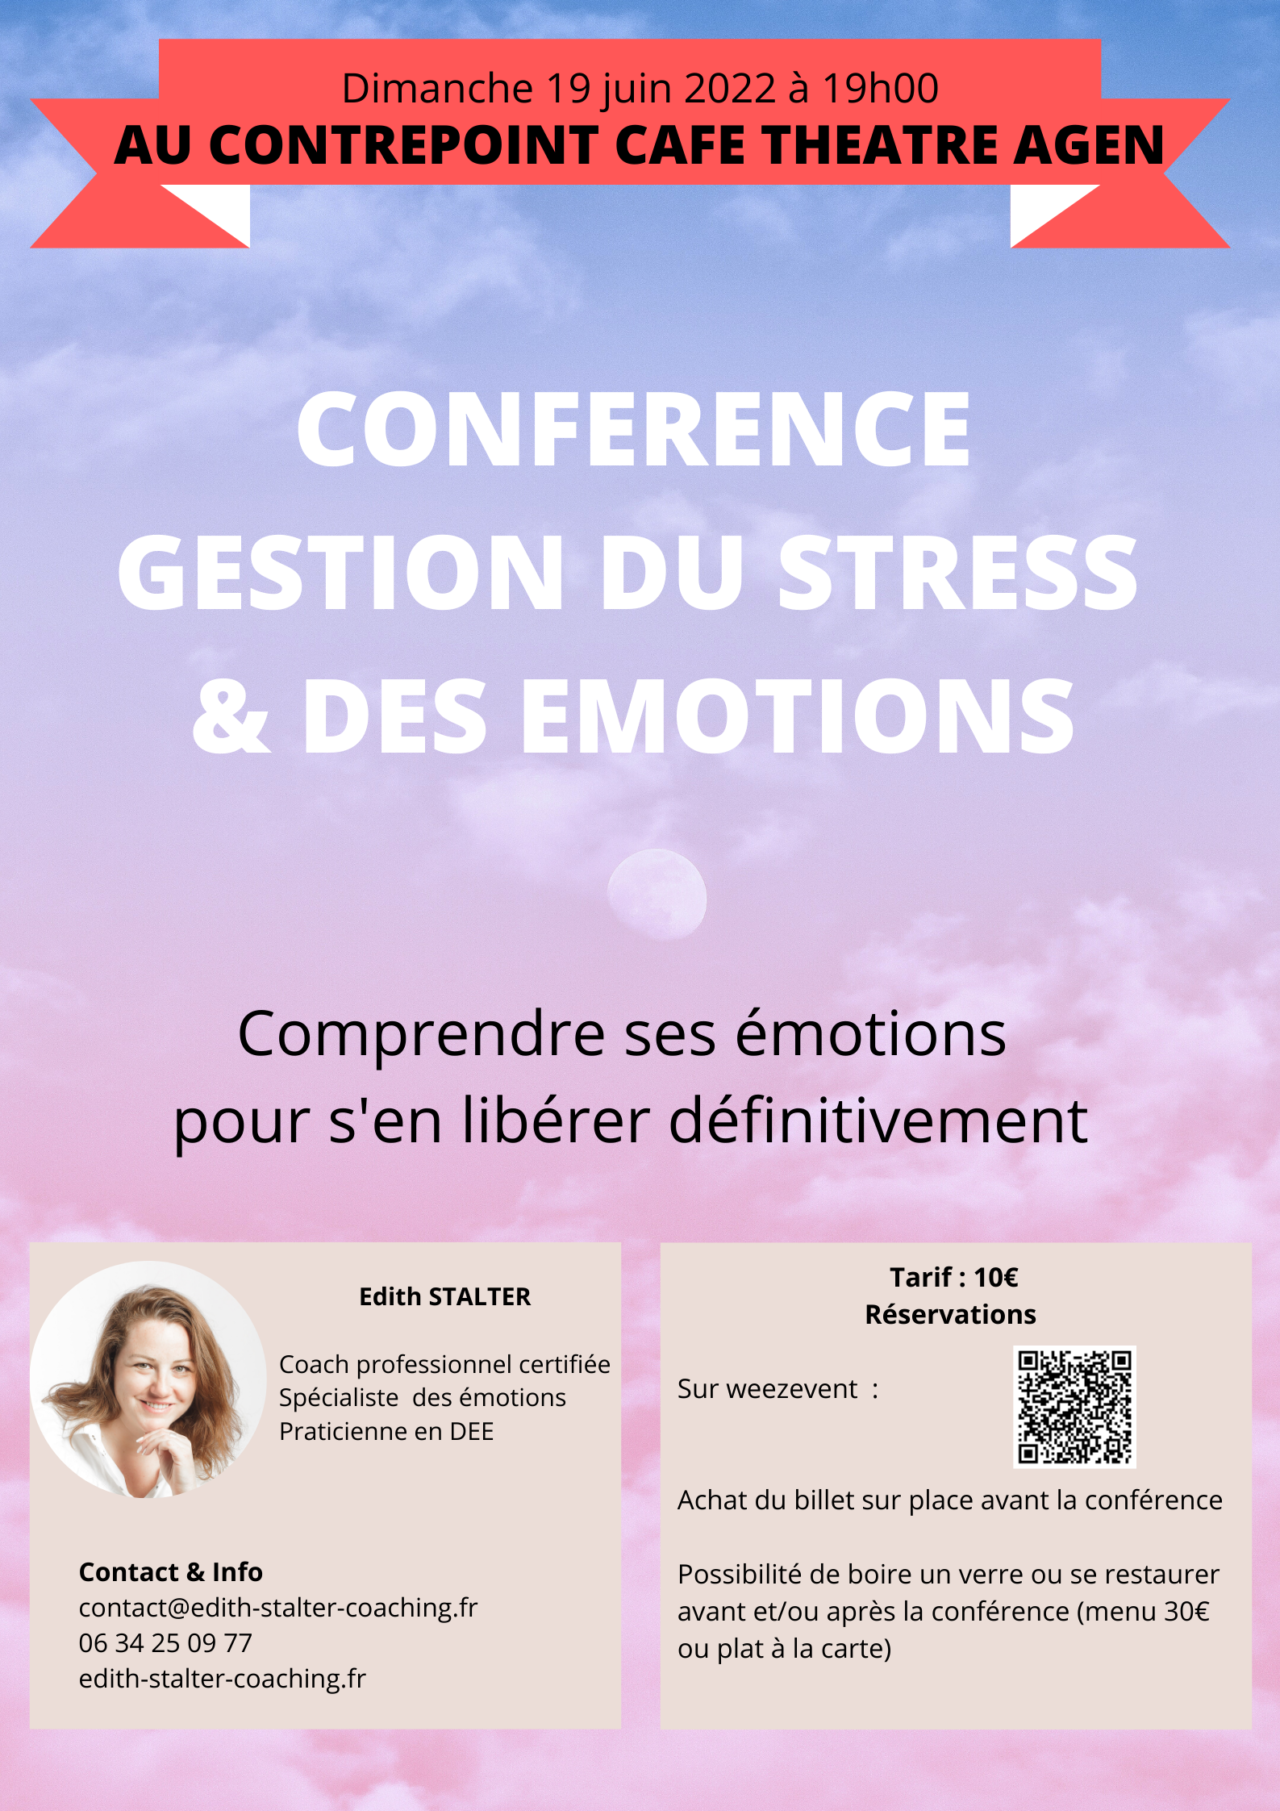 https://edith-stalter-coaching.fr/wp-content/uploads/2022/05/CONFERENCE-GESTION-DU-STRESS-DES-EMOTIONS-1-1280x1811.png